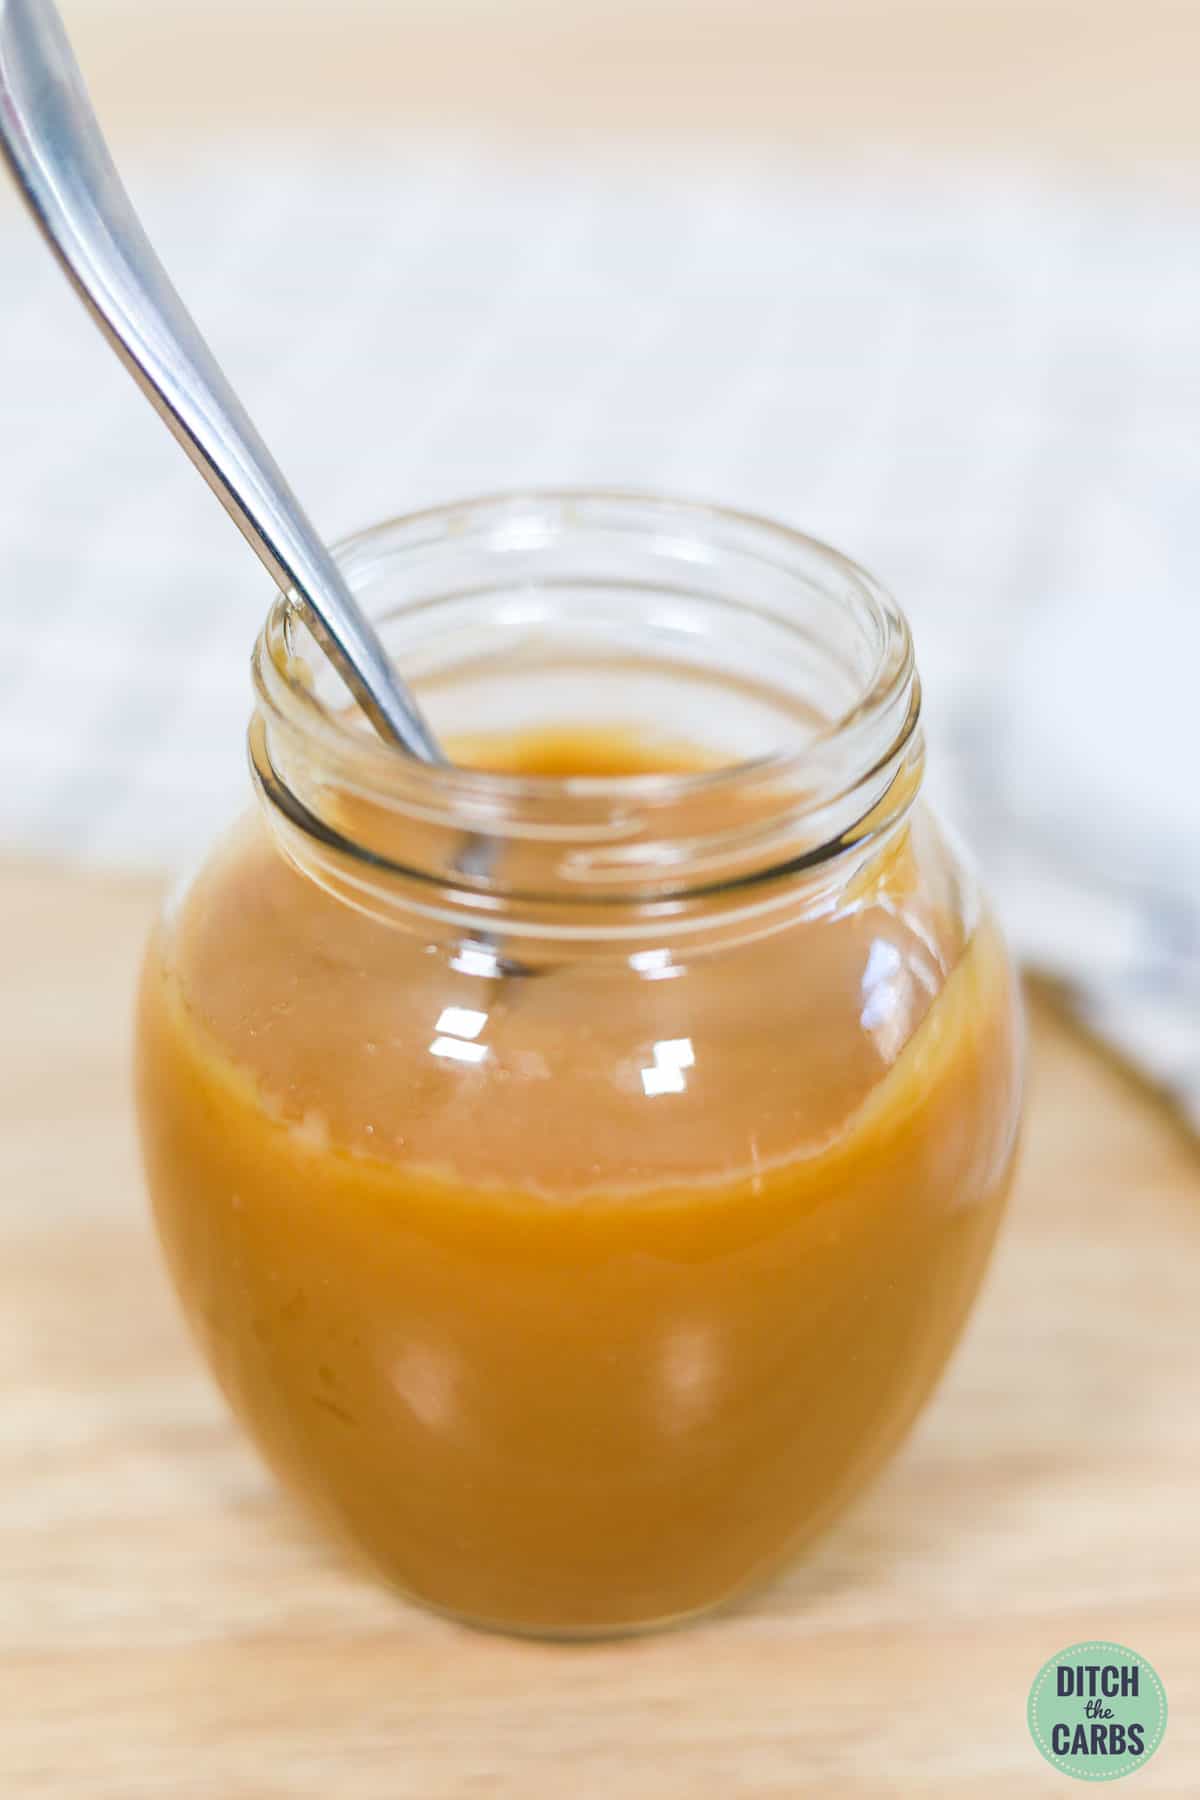 A jar of sugar-free keto caramel sauce with a spoon in it